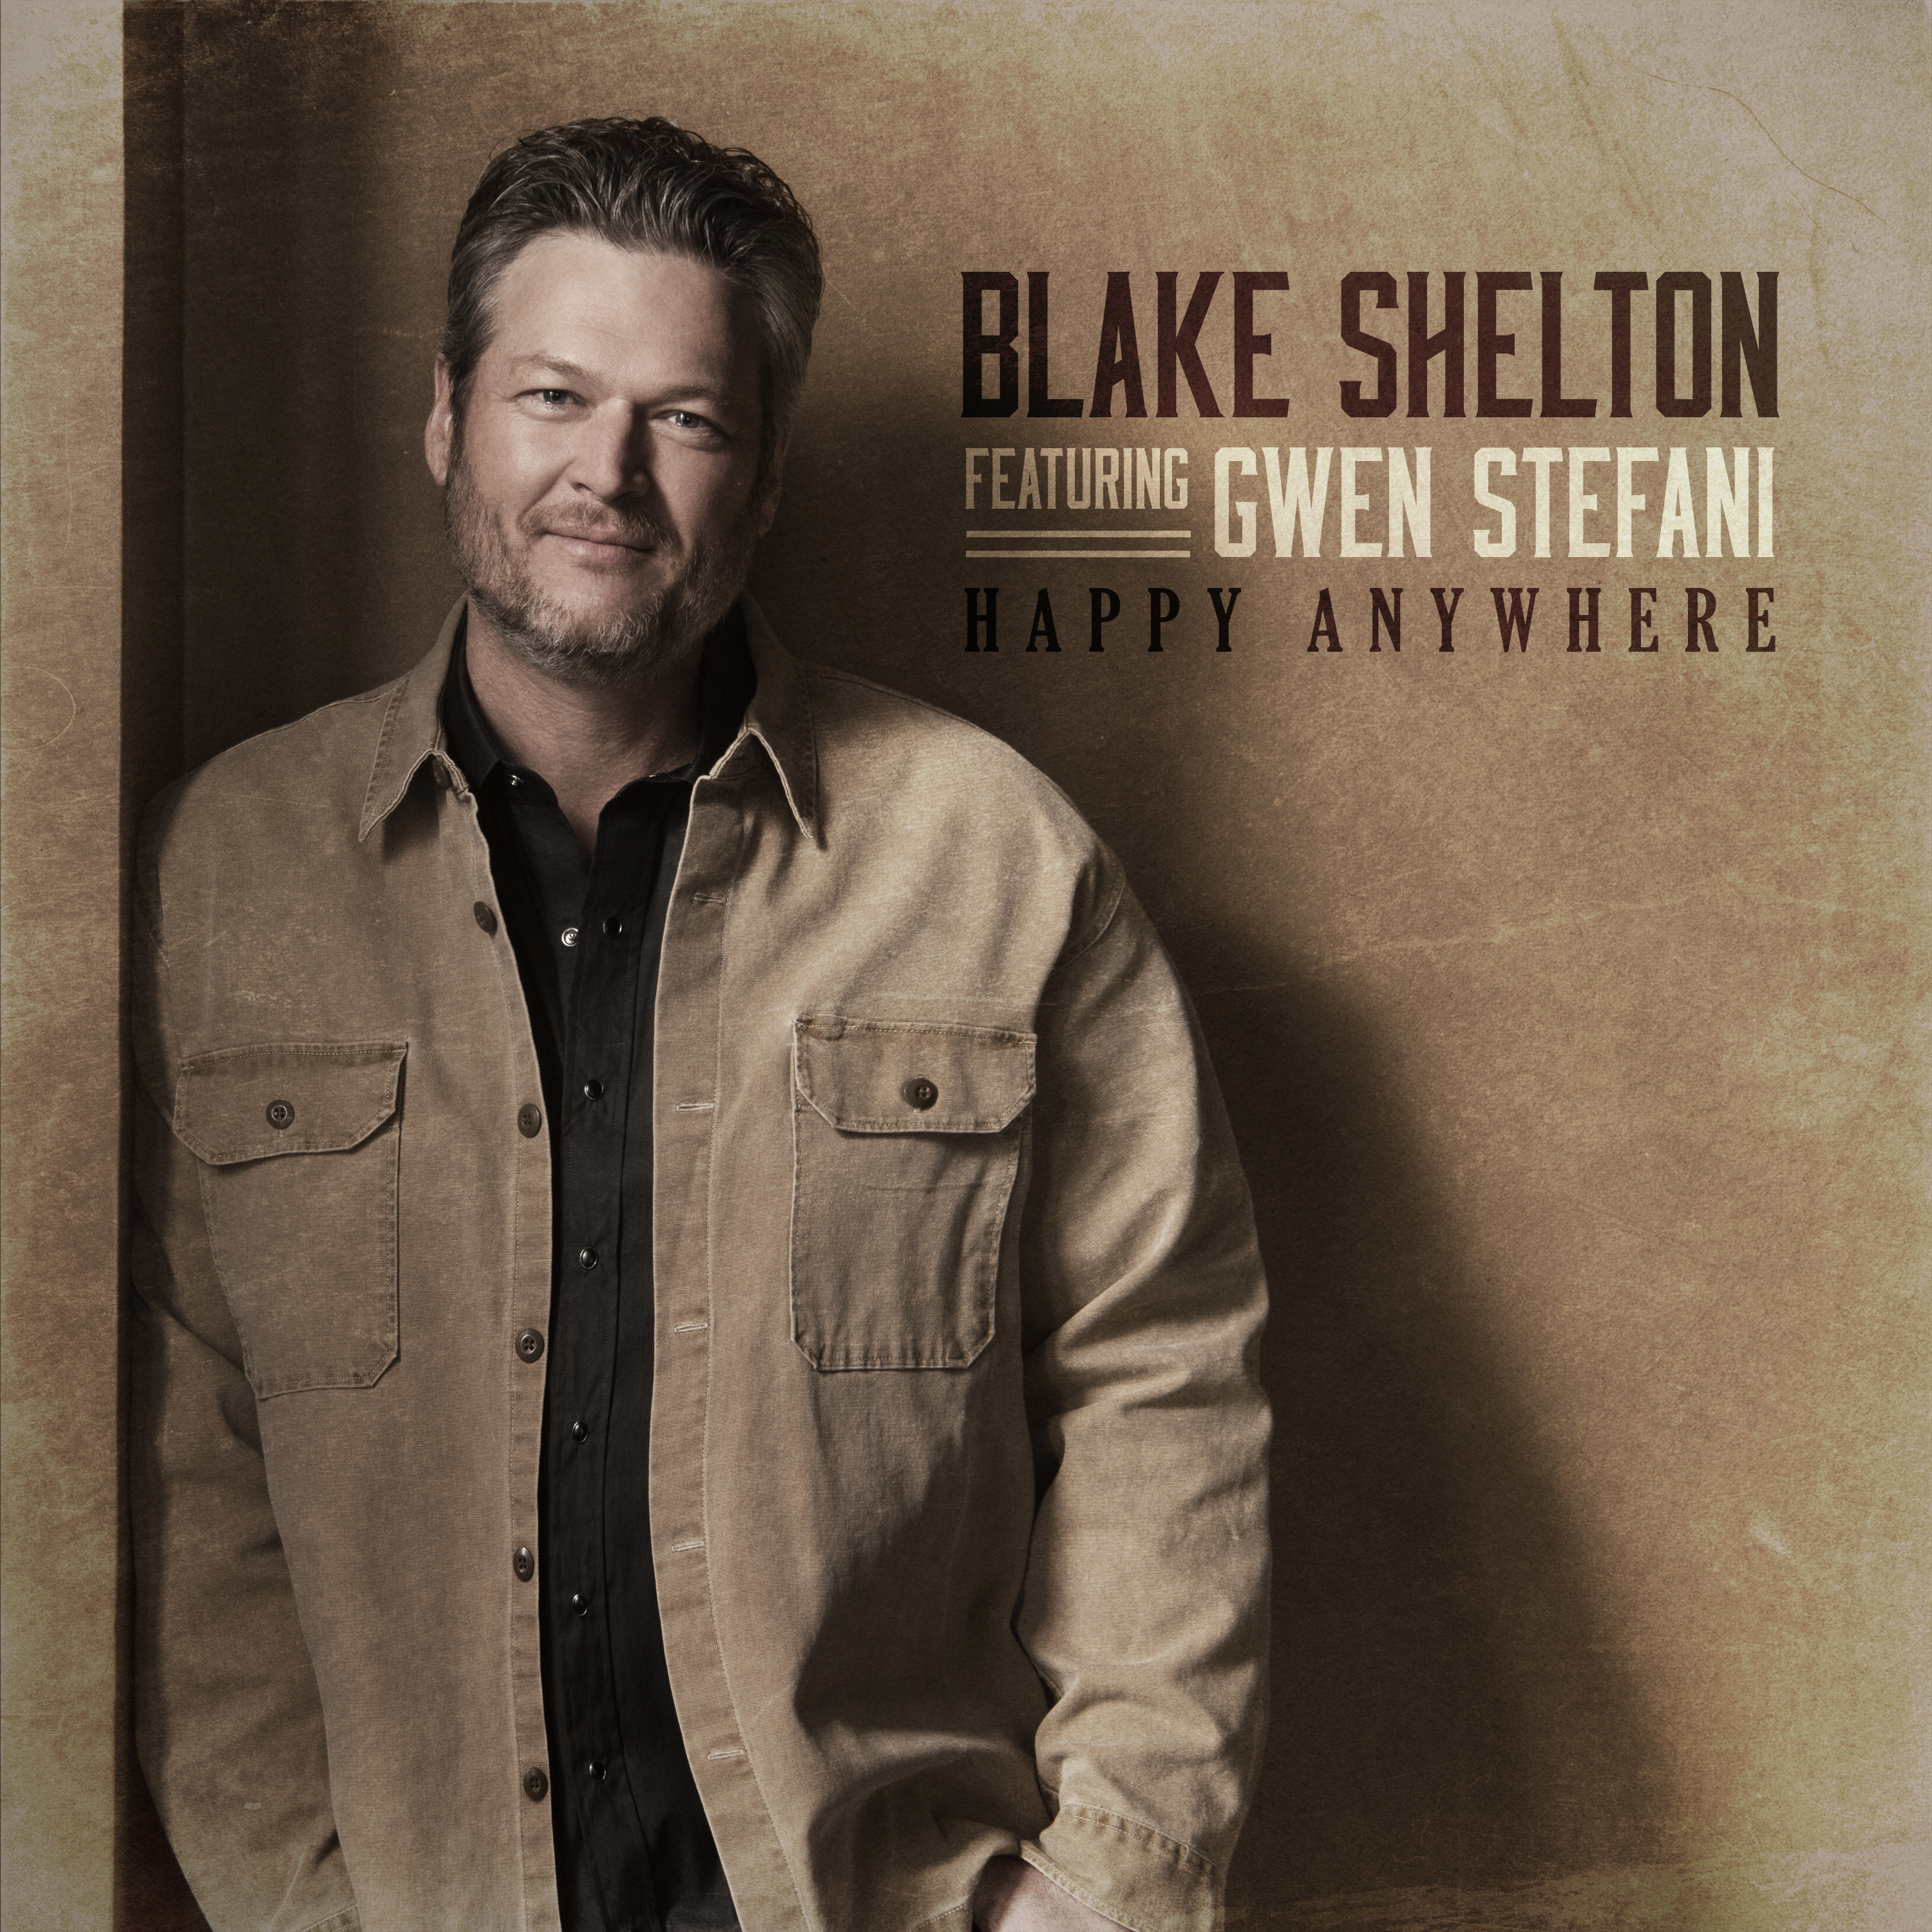 BLAKE SHELTON’S “HAPPY ANYWHERE” TOPS COUNTRY DIGITAL SONG SALES CHART WITH NEARLY 27,000 TRACKS SOLD